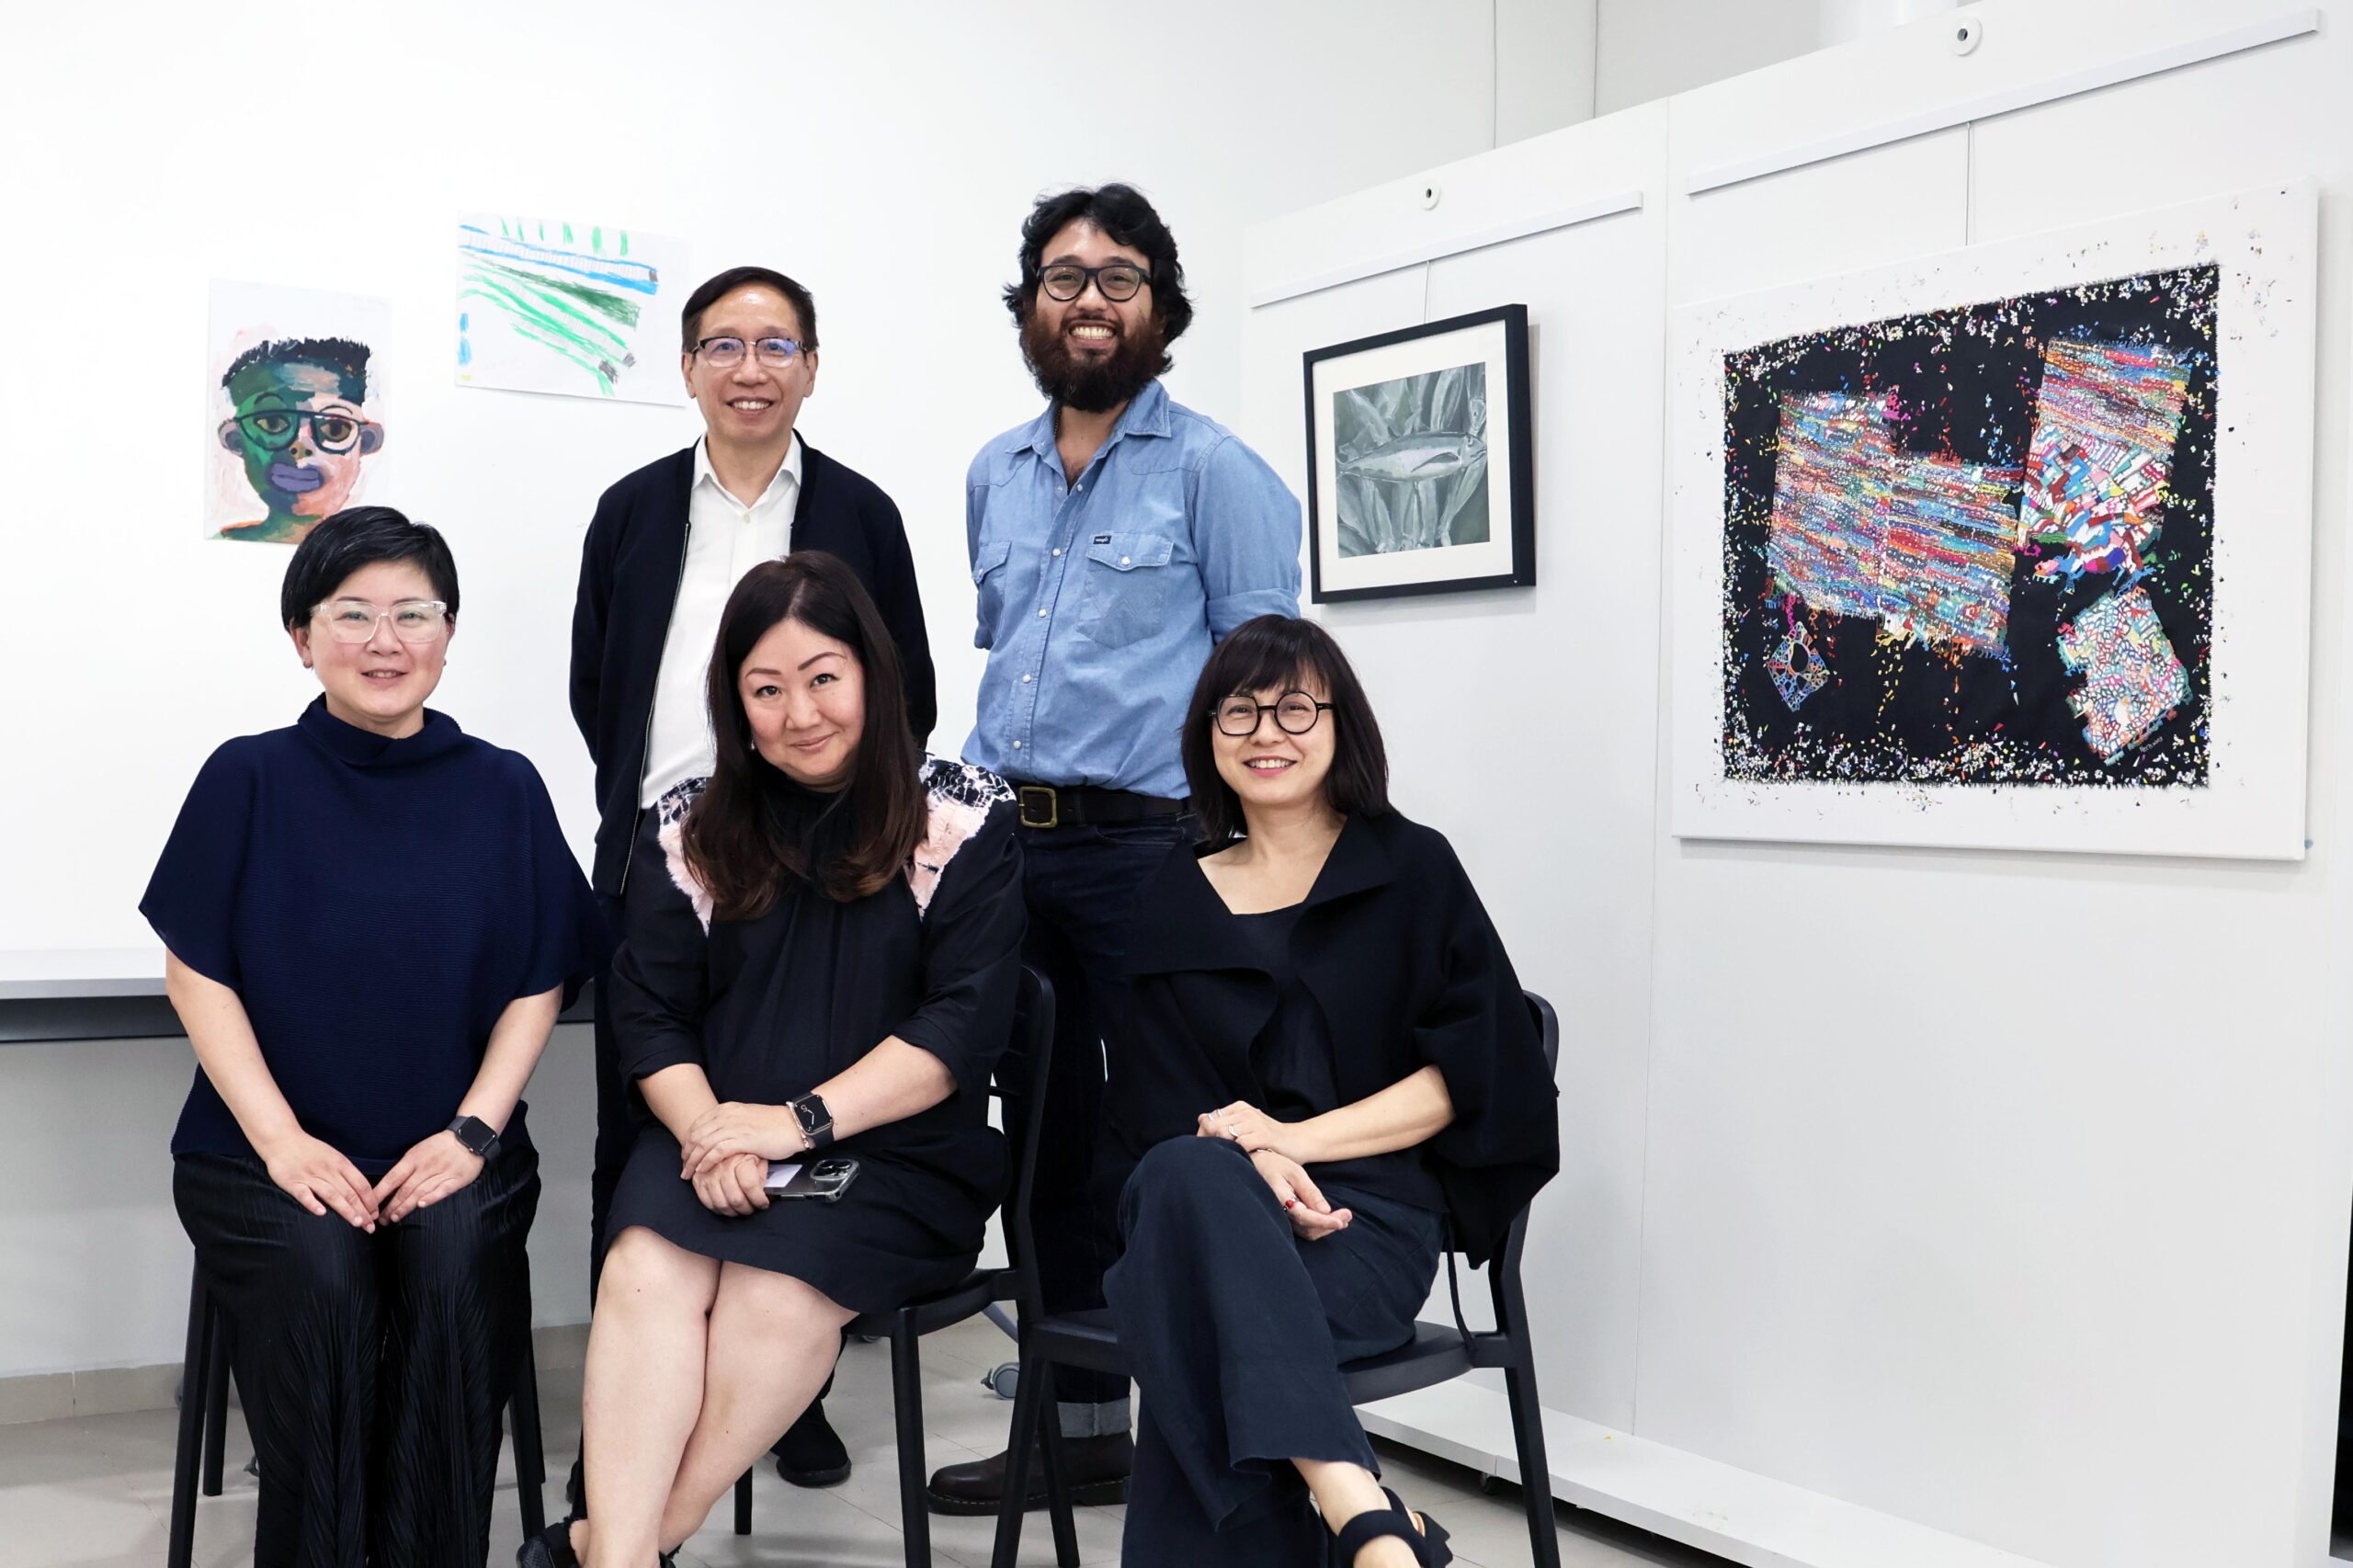 The panel of judges of the UOL X ART:DIS Prize 2023 (Clockwise from top left, Mr Liam Wee Sin, Group Chief Executive at UOL Group Limited, Mr John Tung, Independent curator and former Assistant Curator at the Singapore Art Museum, Ms Adeline Kueh, Senior Lecturer at LASALLE College of the Arts Singapore, Ms Mae Anderson, Chairman at Art Outreach and Managing Director at BNP Paribas Wealth Management, and Ms Dee Chia, Deputy Director of Audience and Engagement at National Gallery Singapore.